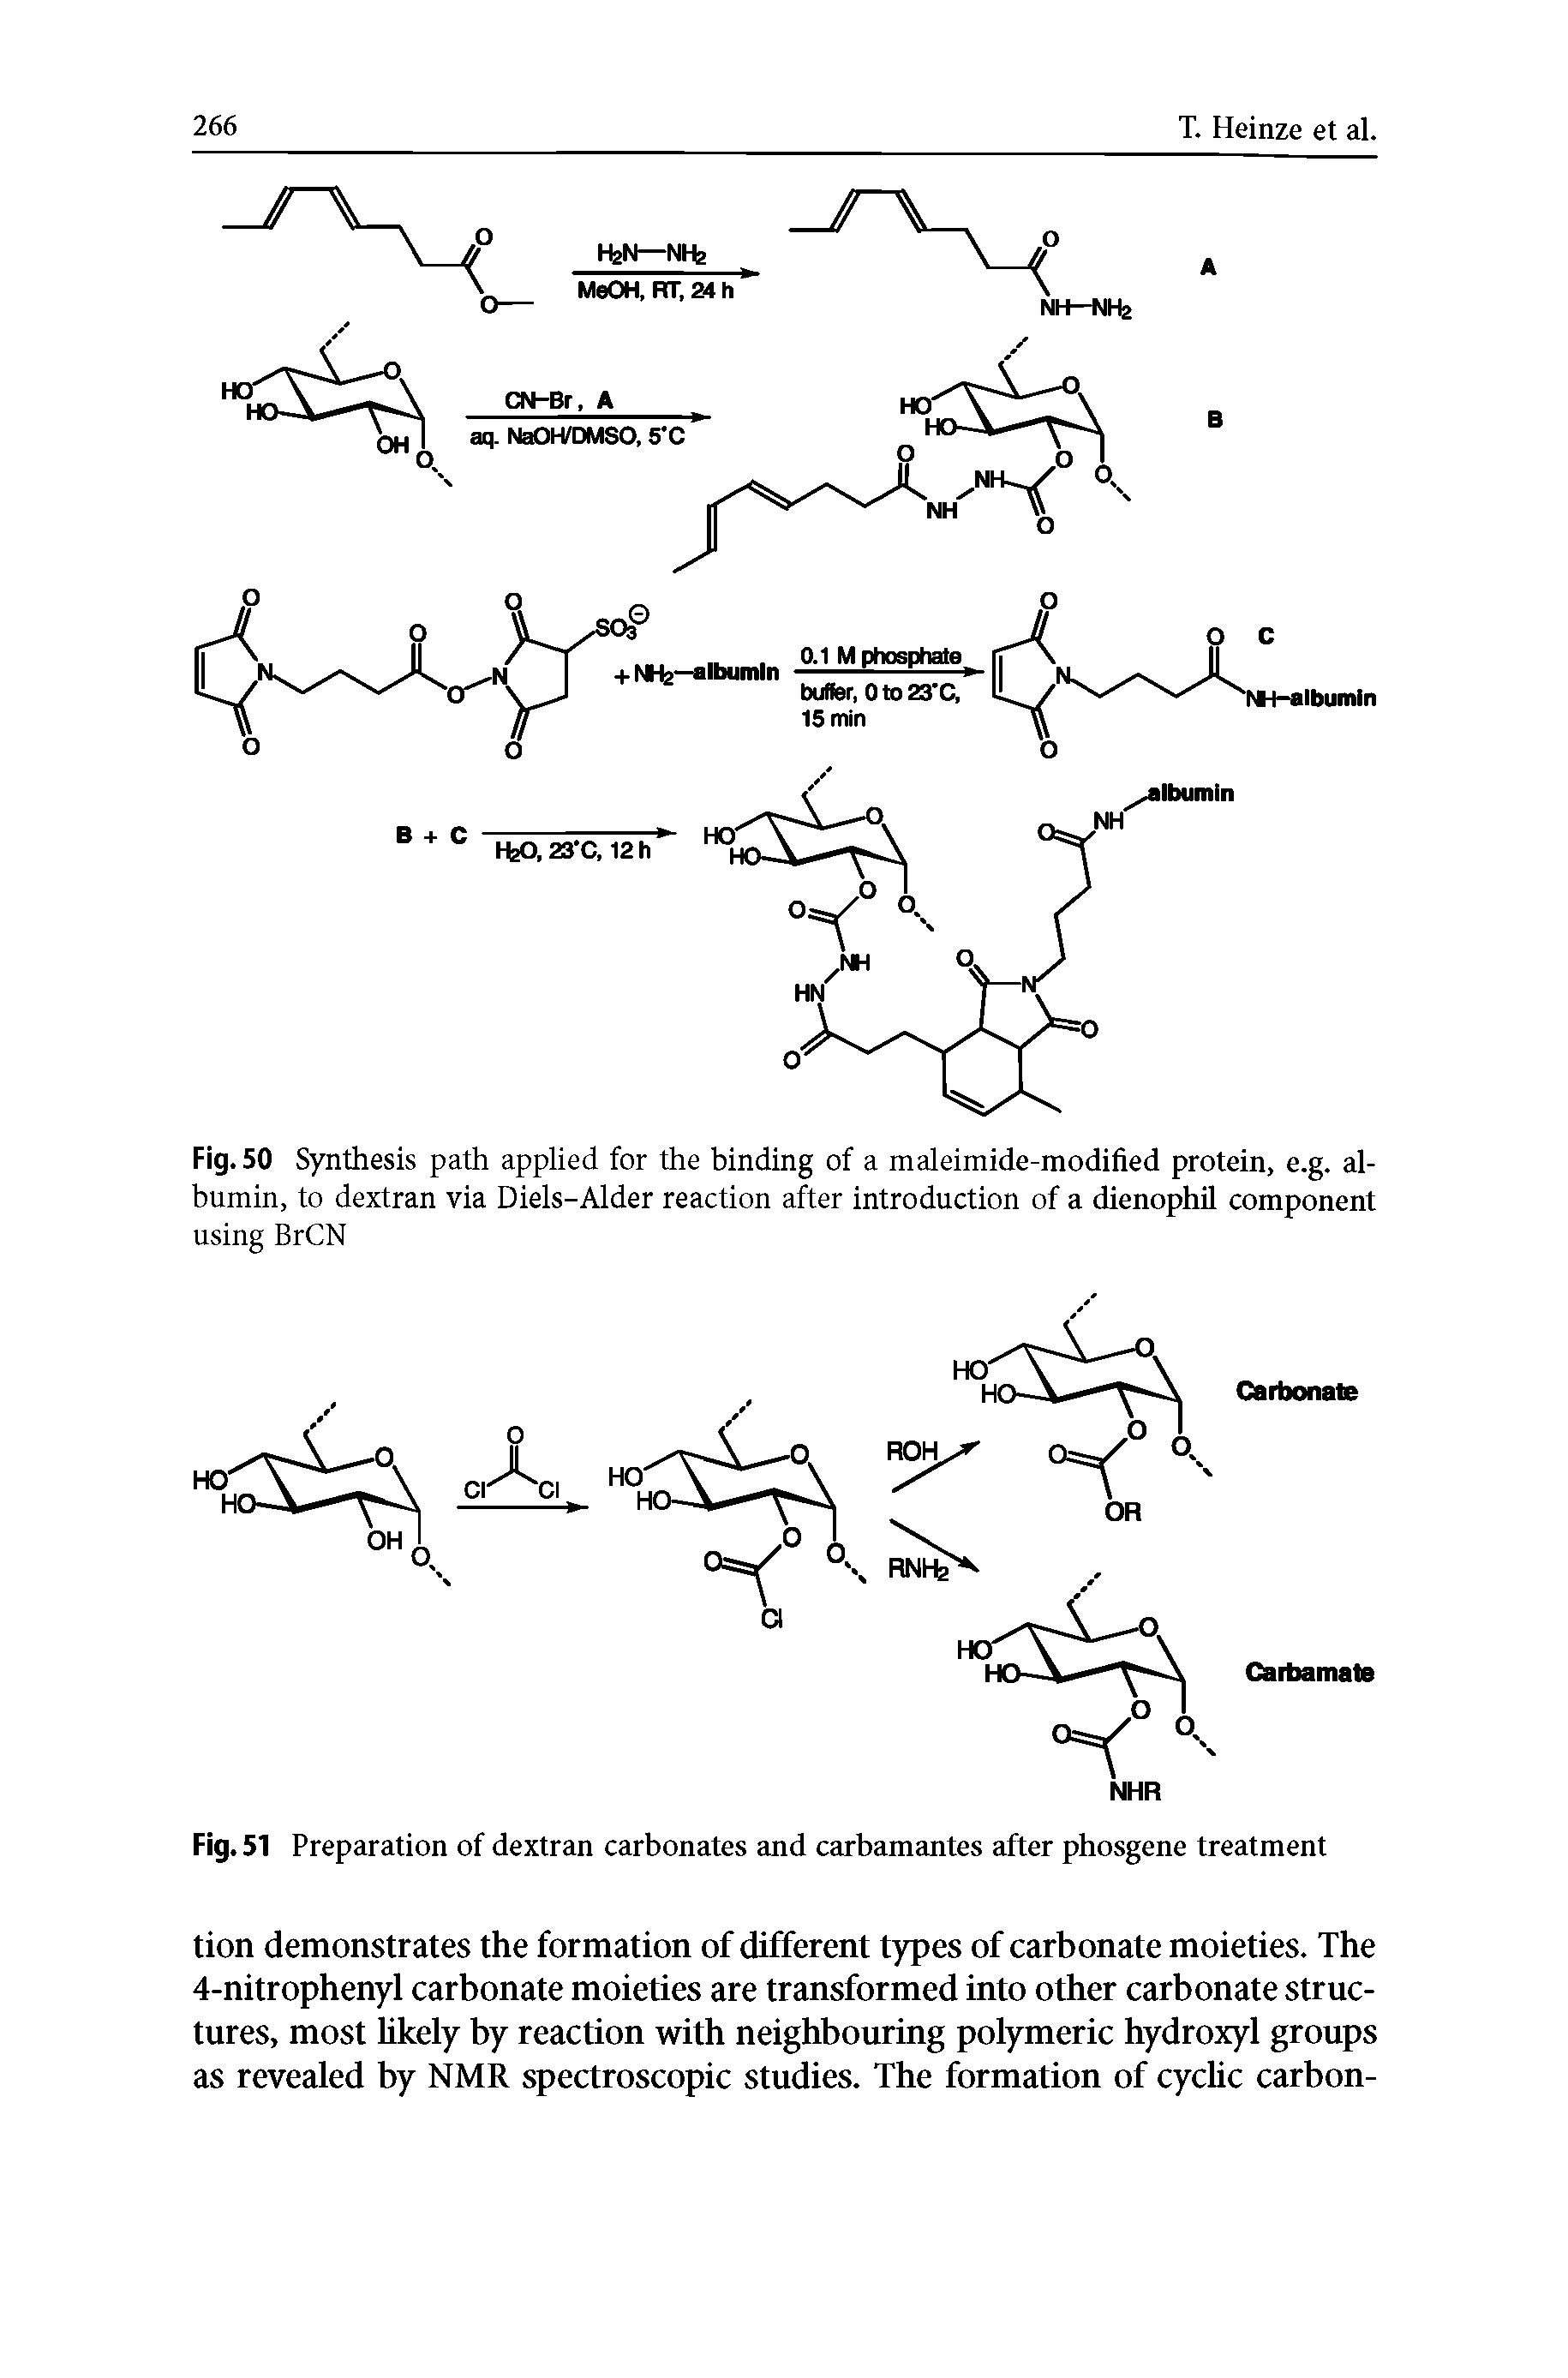 Fig. 51 Preparation of dextran carbonates and carbamantes after phosgene treatment...